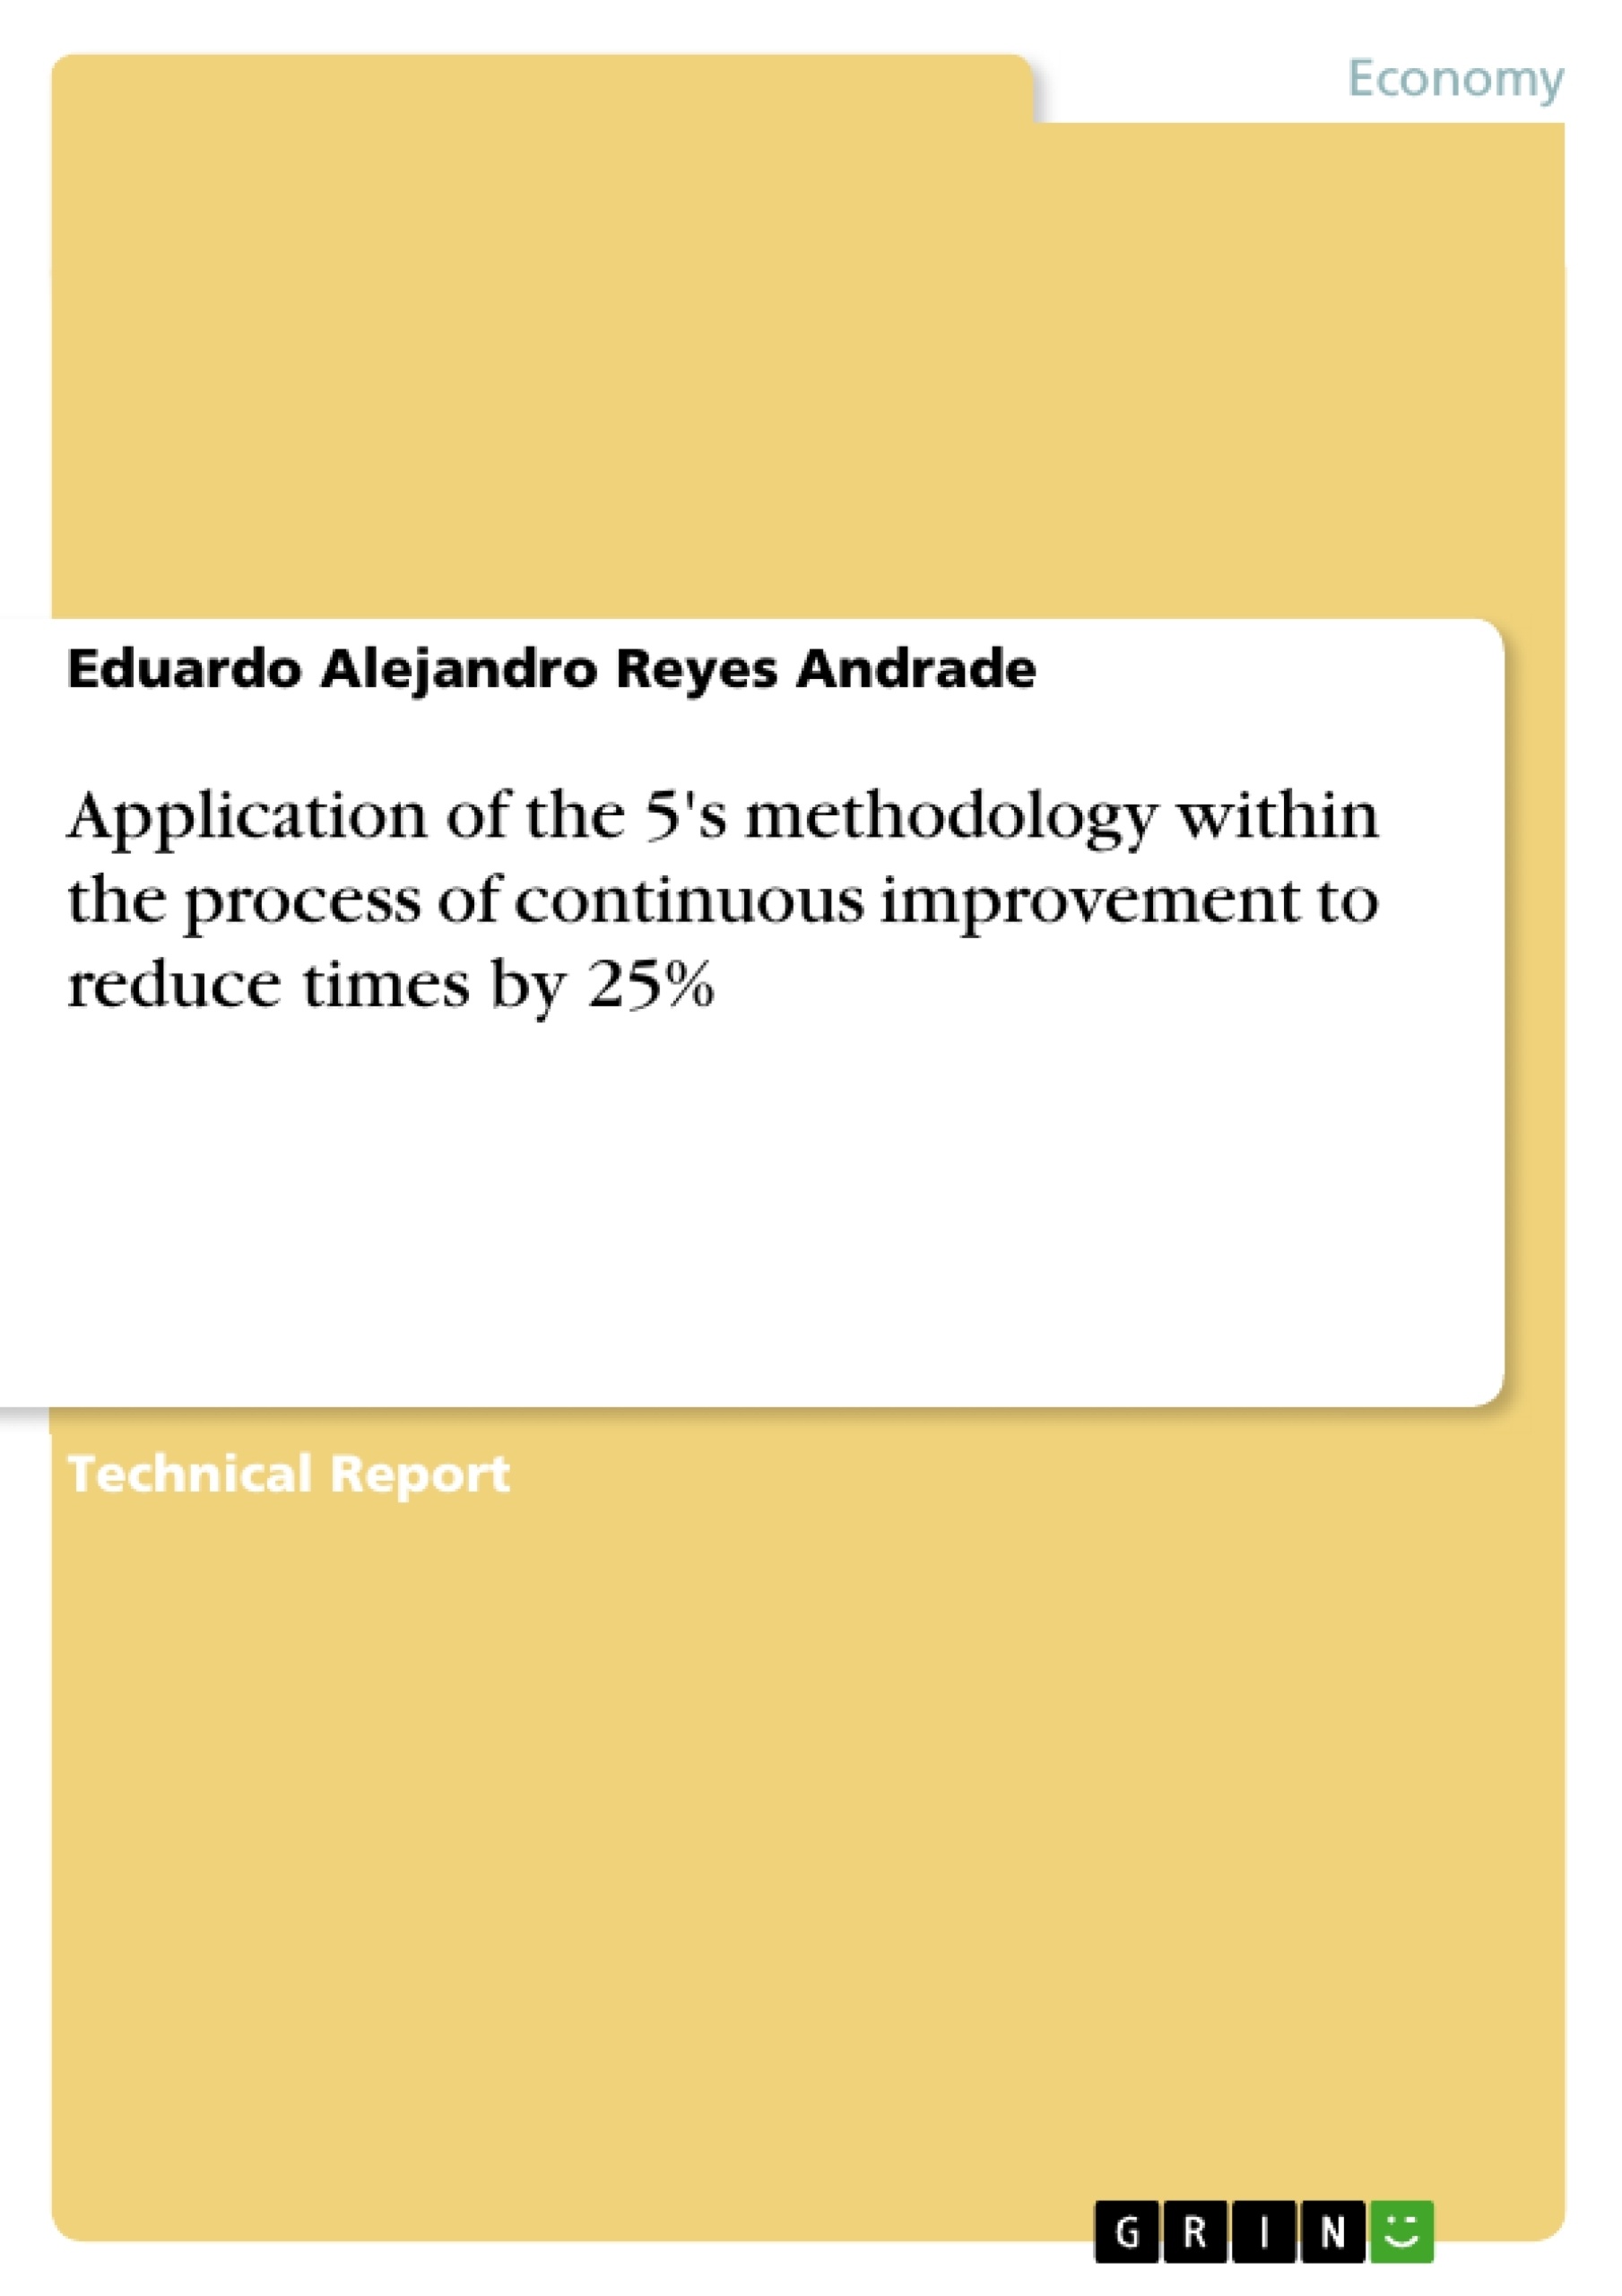 Título: Application of the 5's methodology within the process of continuous improvement to reduce times by 25%